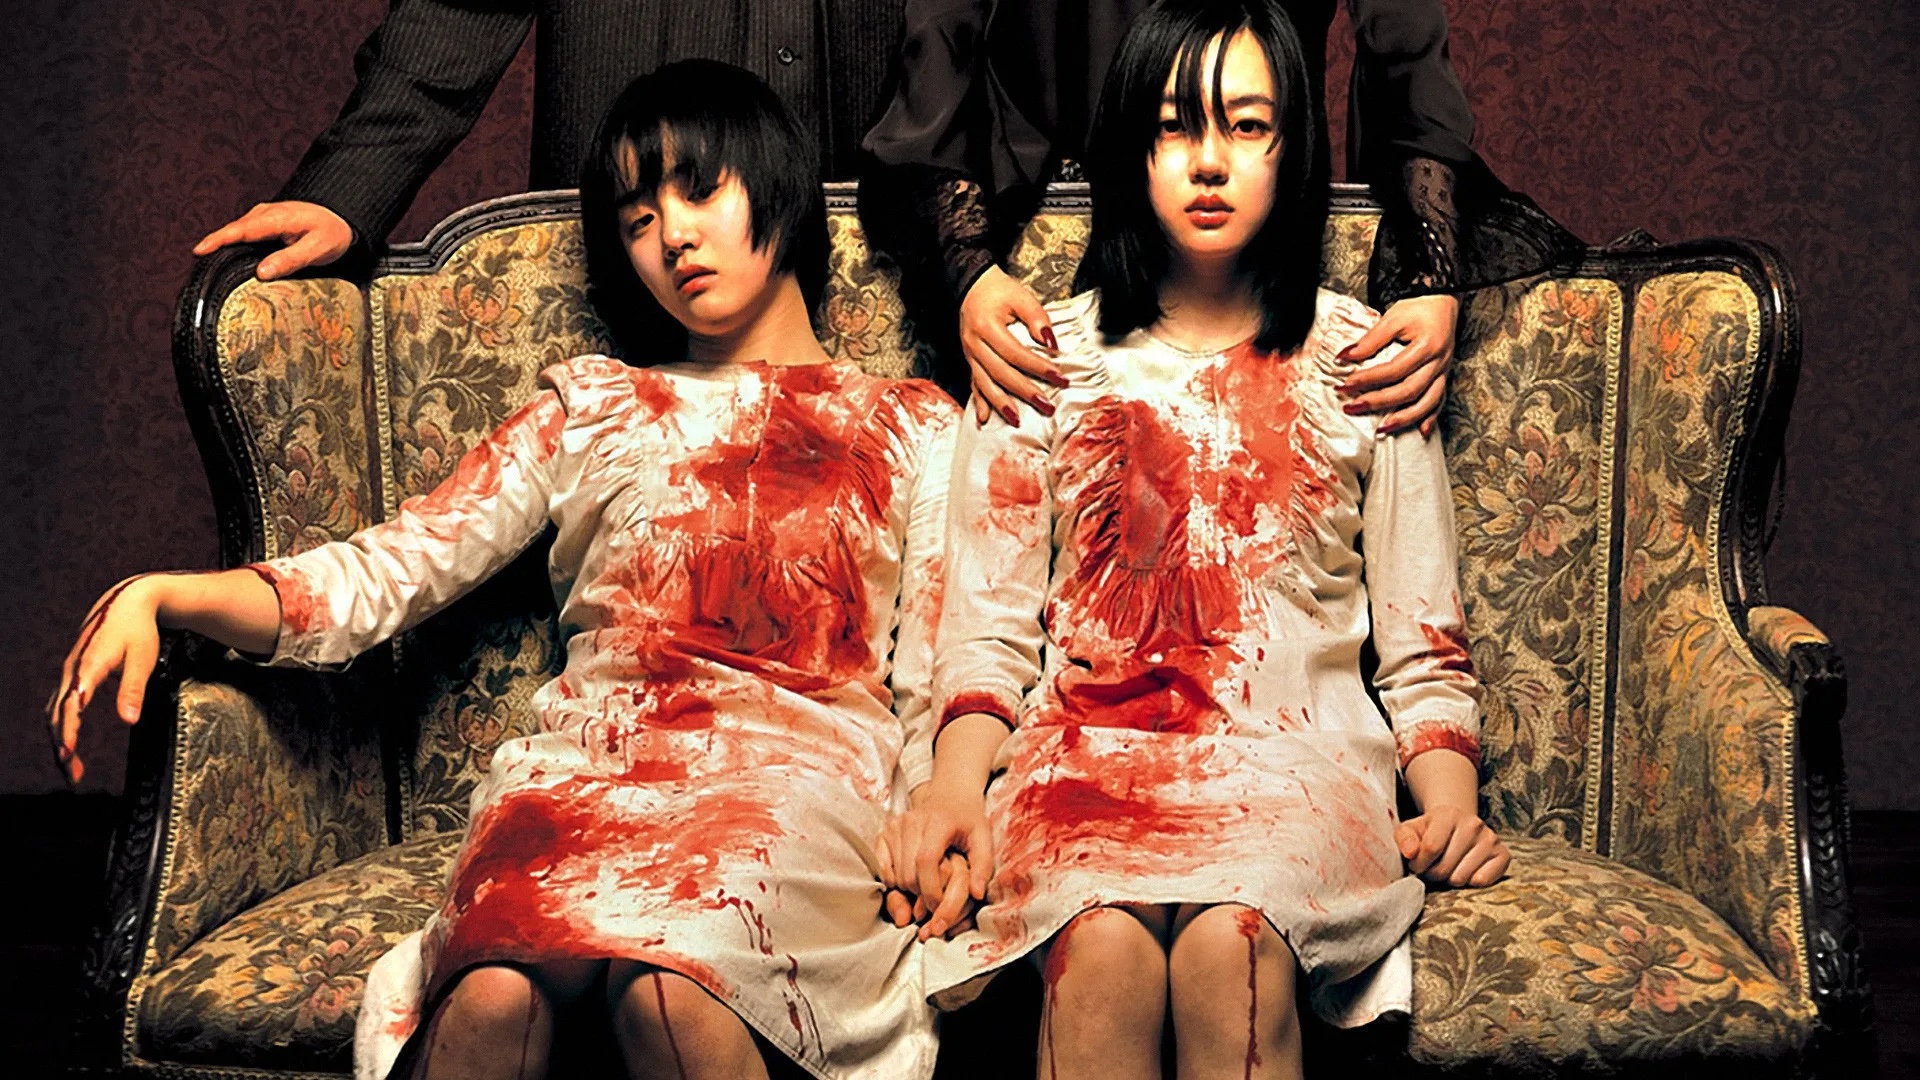 Two Korean women in white dresses covered in blood sit side by side on a brocade couch, one with an unseen figure standing behind and above her, hands firmly on her shoulders, in A Tale of Two Sisters